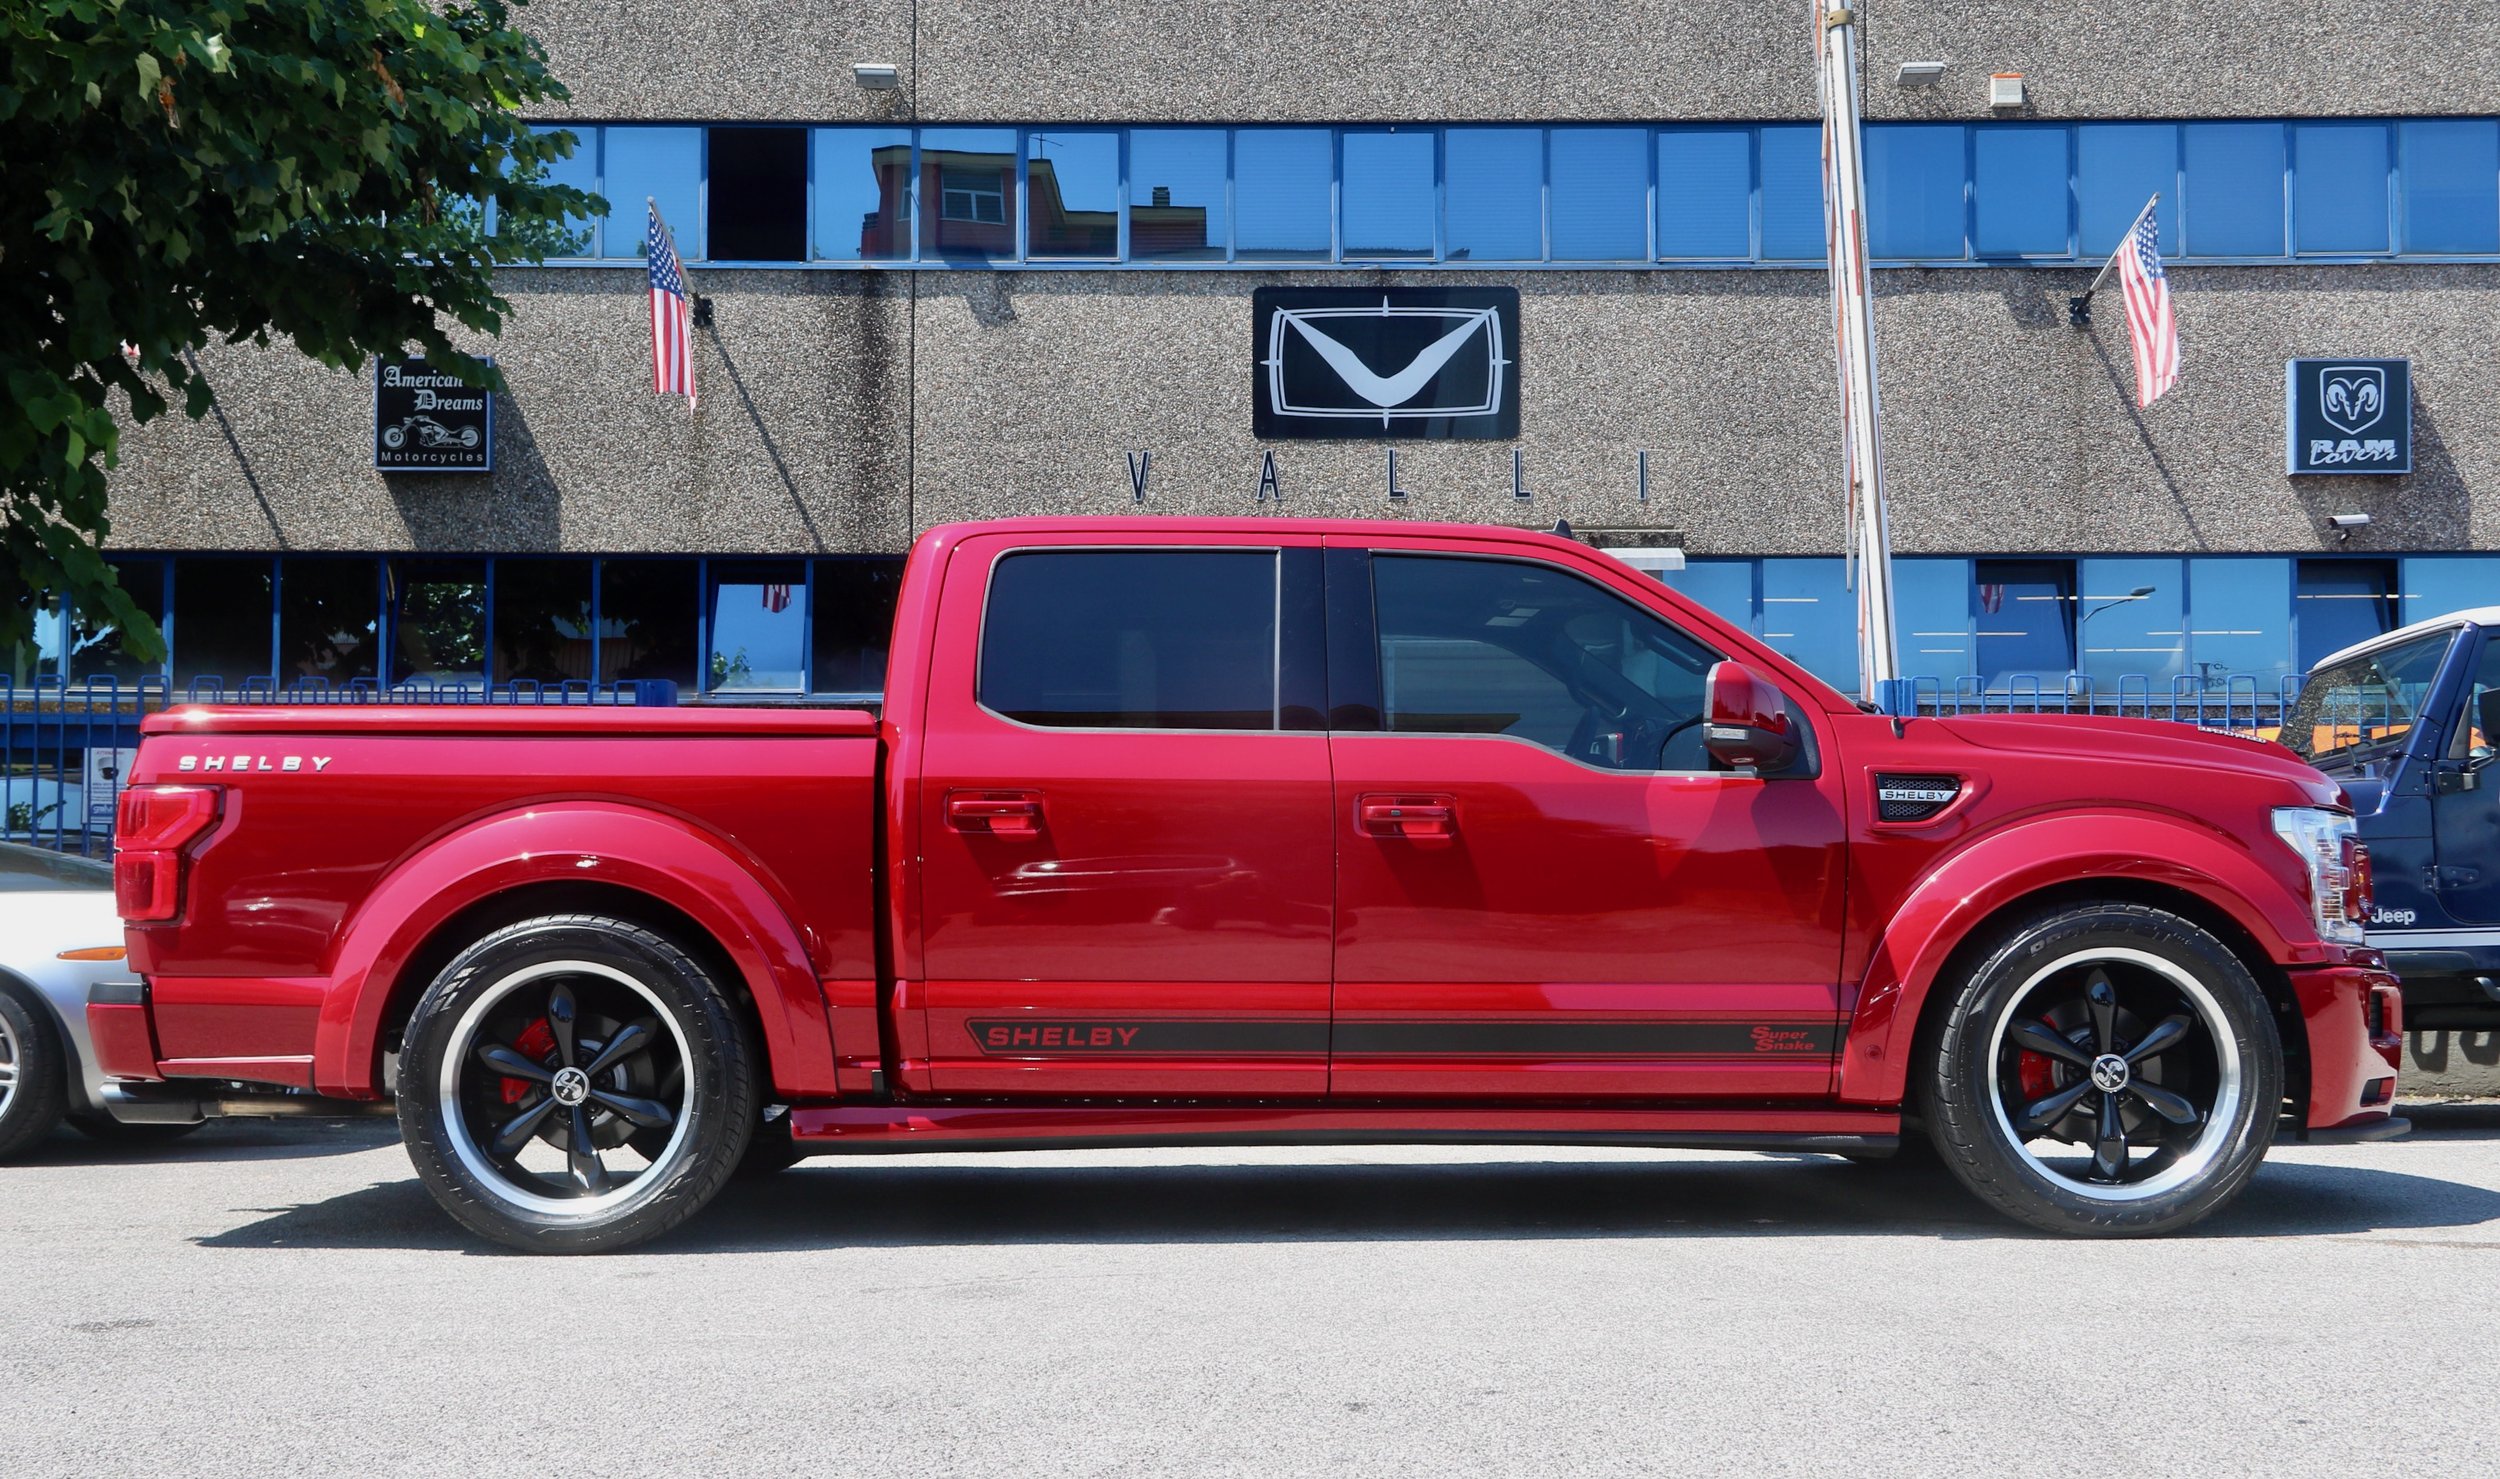 07 2020 Ford F150 Shelby Super Snake C.S.M. 20STS0259 Rapid Red VALLIstore Wide-Body.jpeg